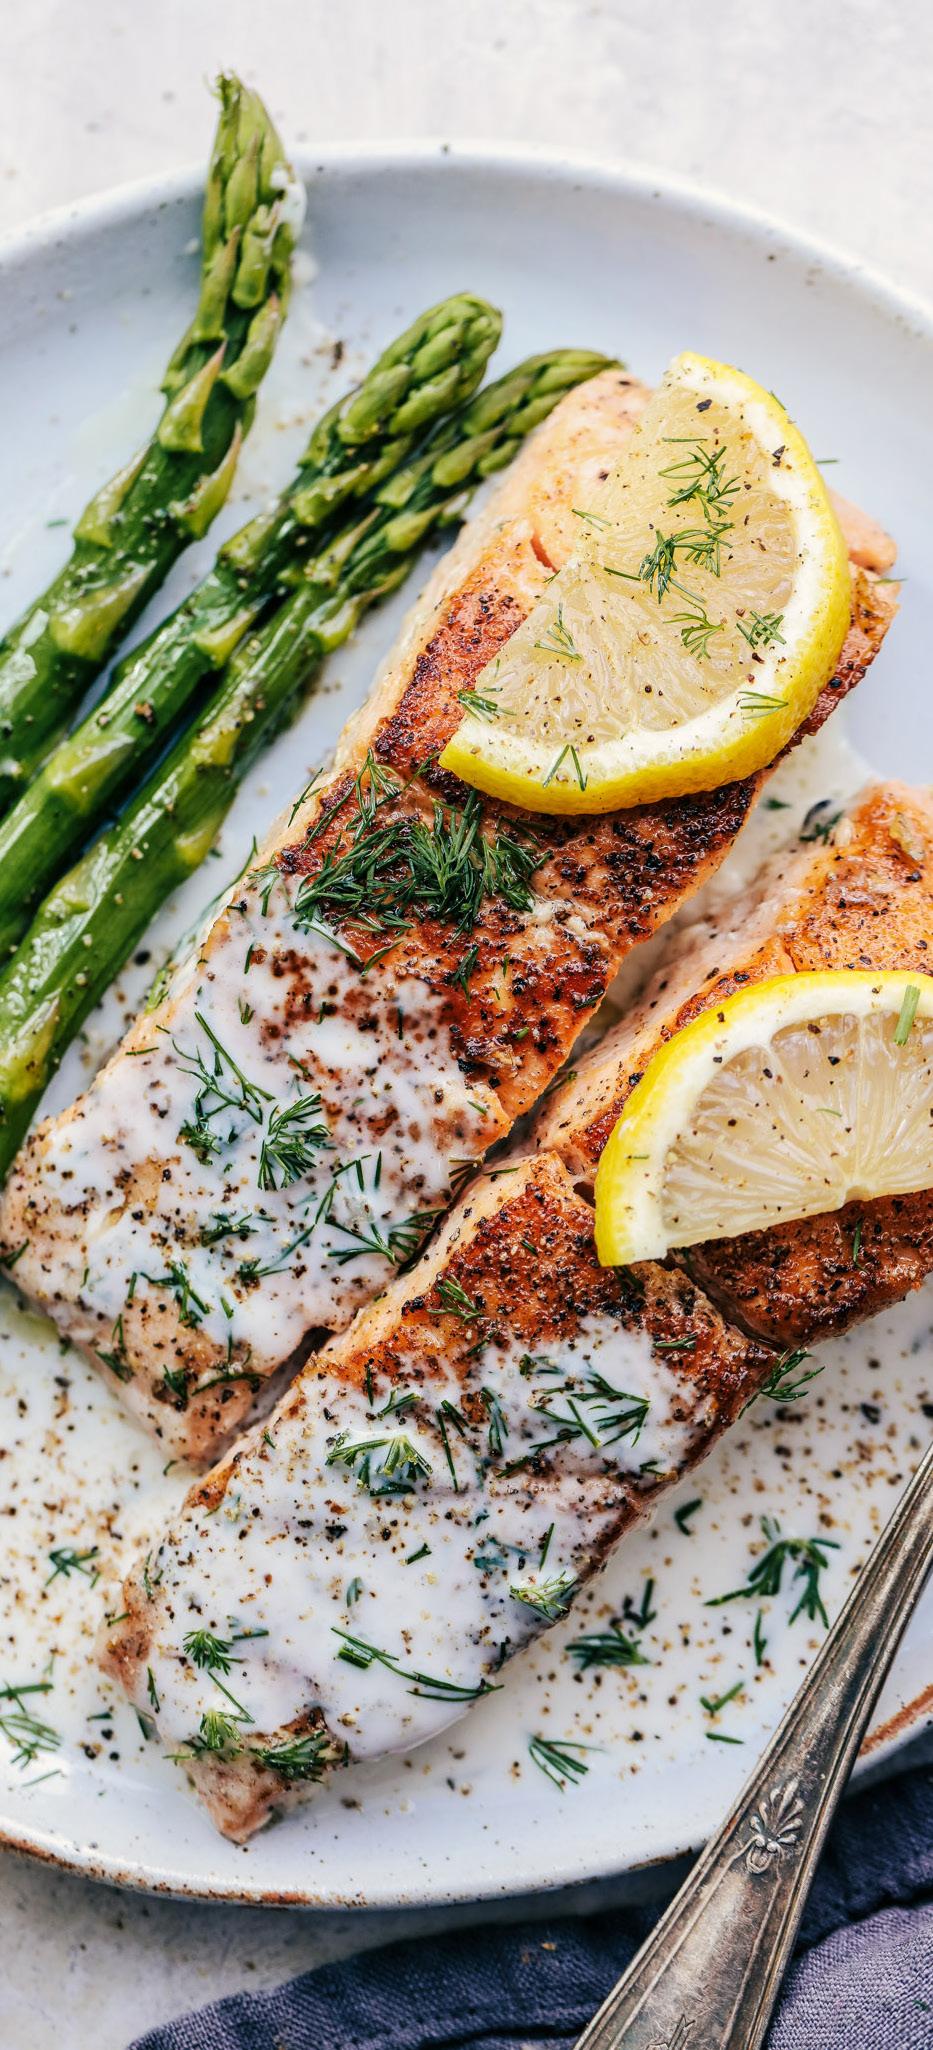 PAN SEARED SALMON with a creamy lemon dill sauce PREP TIME 5 MIN COOK TIME 20 MIN TOTAL TIME 25 MIN SERVES 4 1 Tablespoon Olive Oil salt and pepper 4 (6 oz) salmon fillets 3 cloves garlic 1 cup heavy